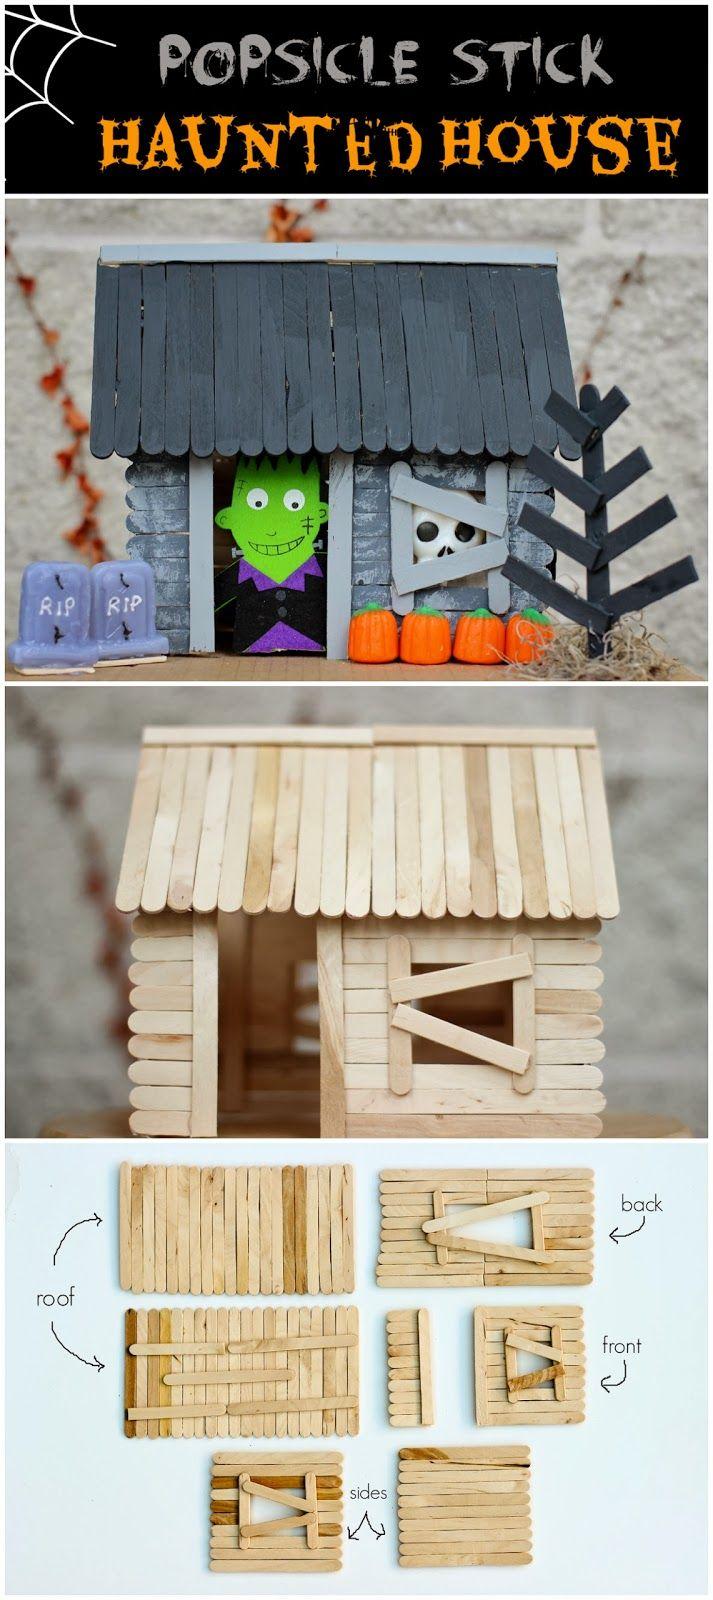 Wedding - HAPPILY EVERLY AFTER: Popsicle Stick Haunted House